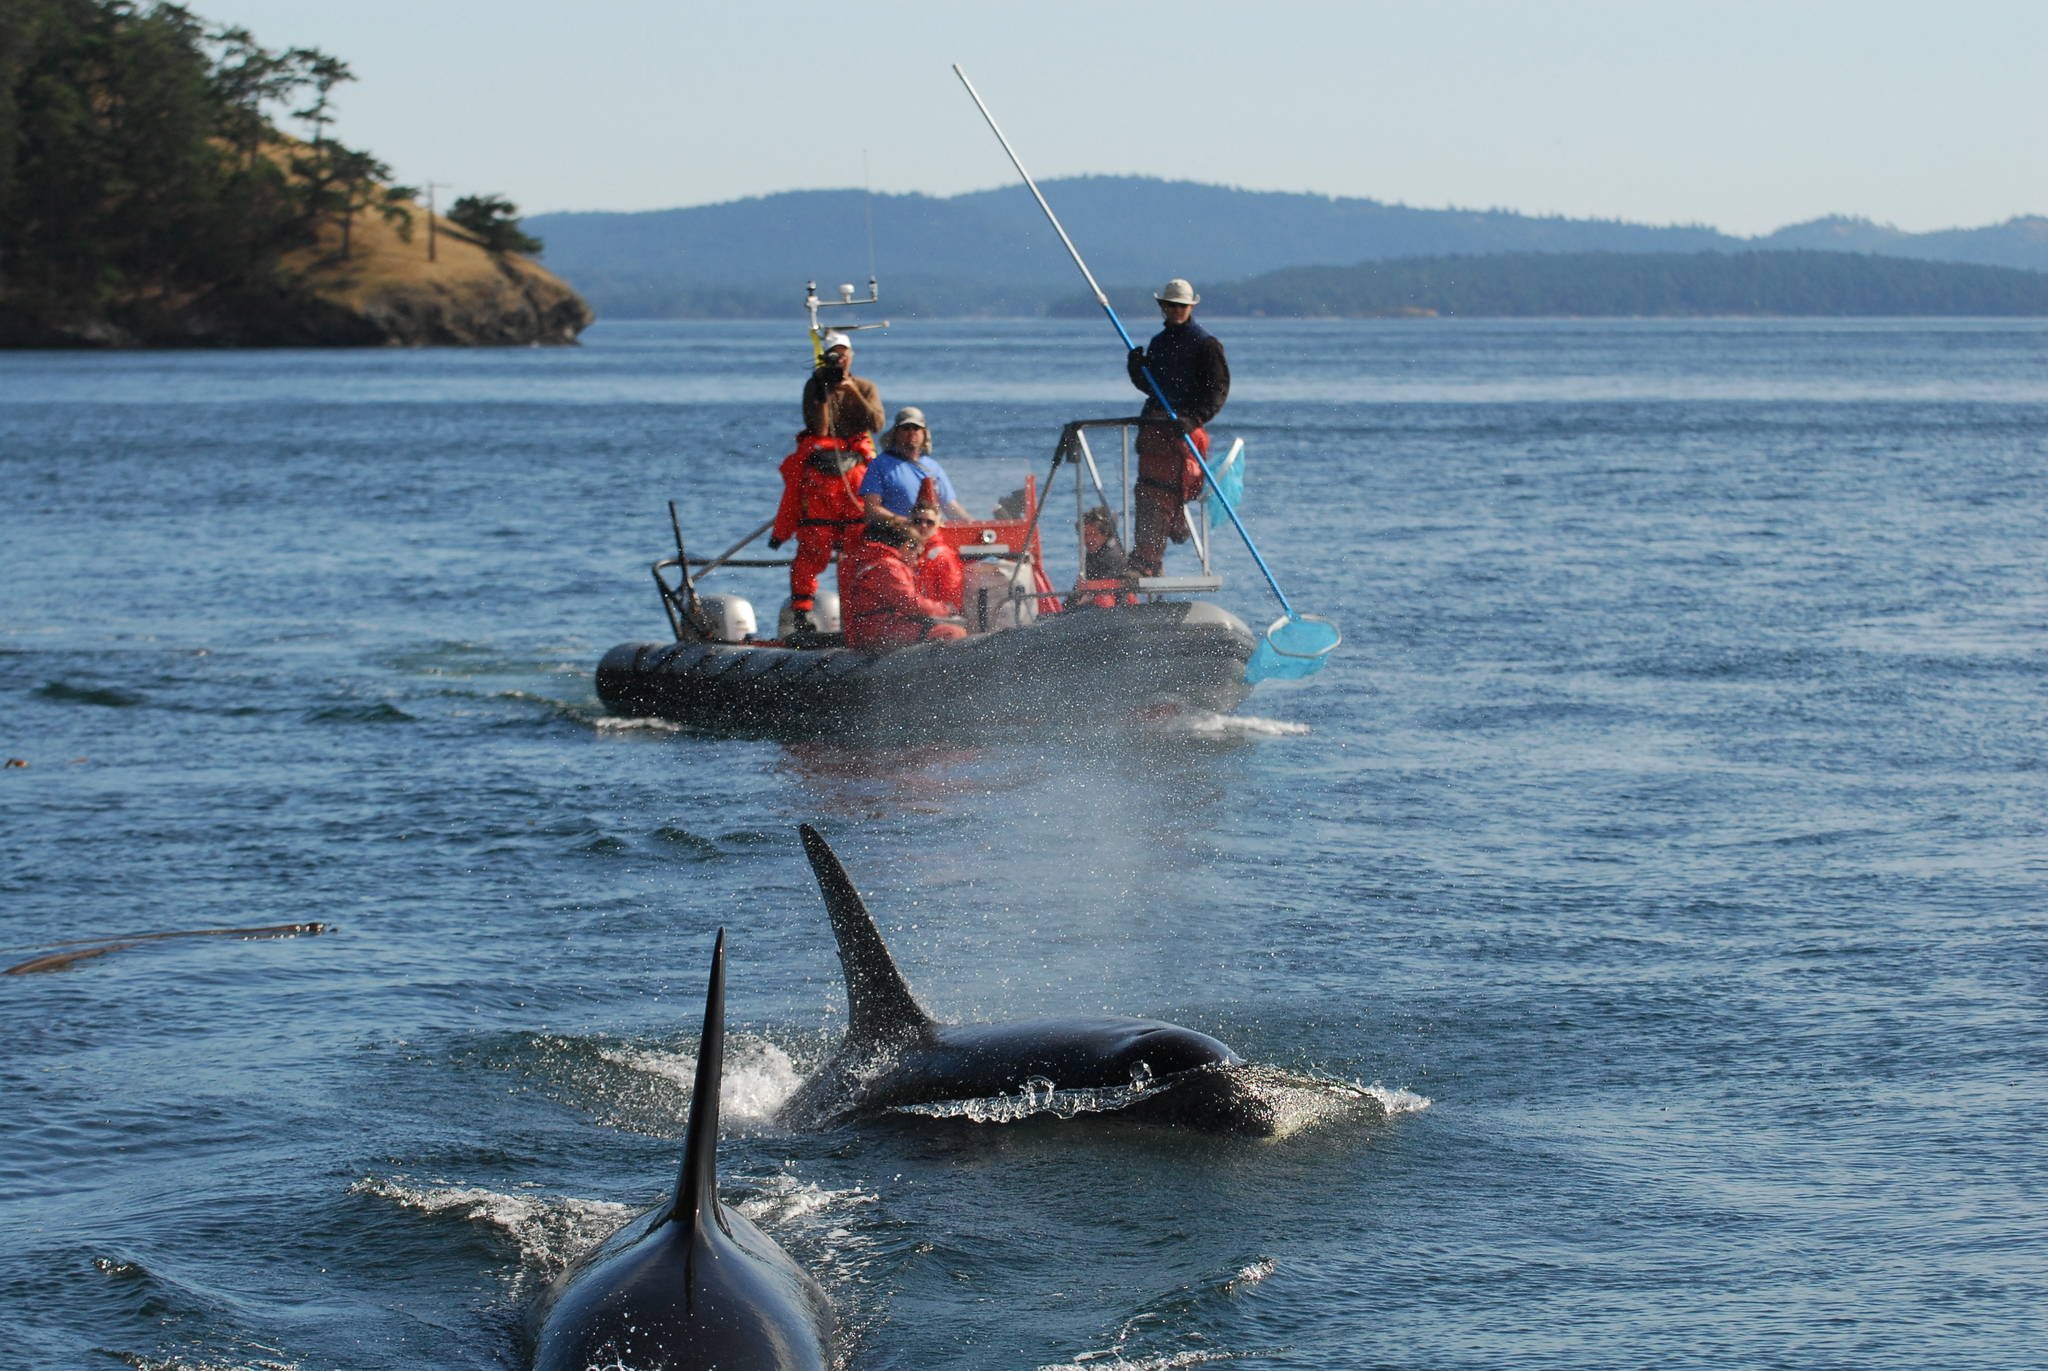 This Sept. 2008 photo provided by the Center for Whale Research taken near Washington state’s San Juan Islands shows scientists looking for clues about the diet of the Pacific Northwest’s endangered orcas using a pool skimmer to collect the scales or other remains of salmon the whales had eaten. A long-term study published Wednesday, March 3, 2021, reaffirmed the importance of Chinook salmon to the whales even when they cruise the outer Pacific Coast, where the fish are harder to find. (Ken Balcomb / Center for Whale Research)